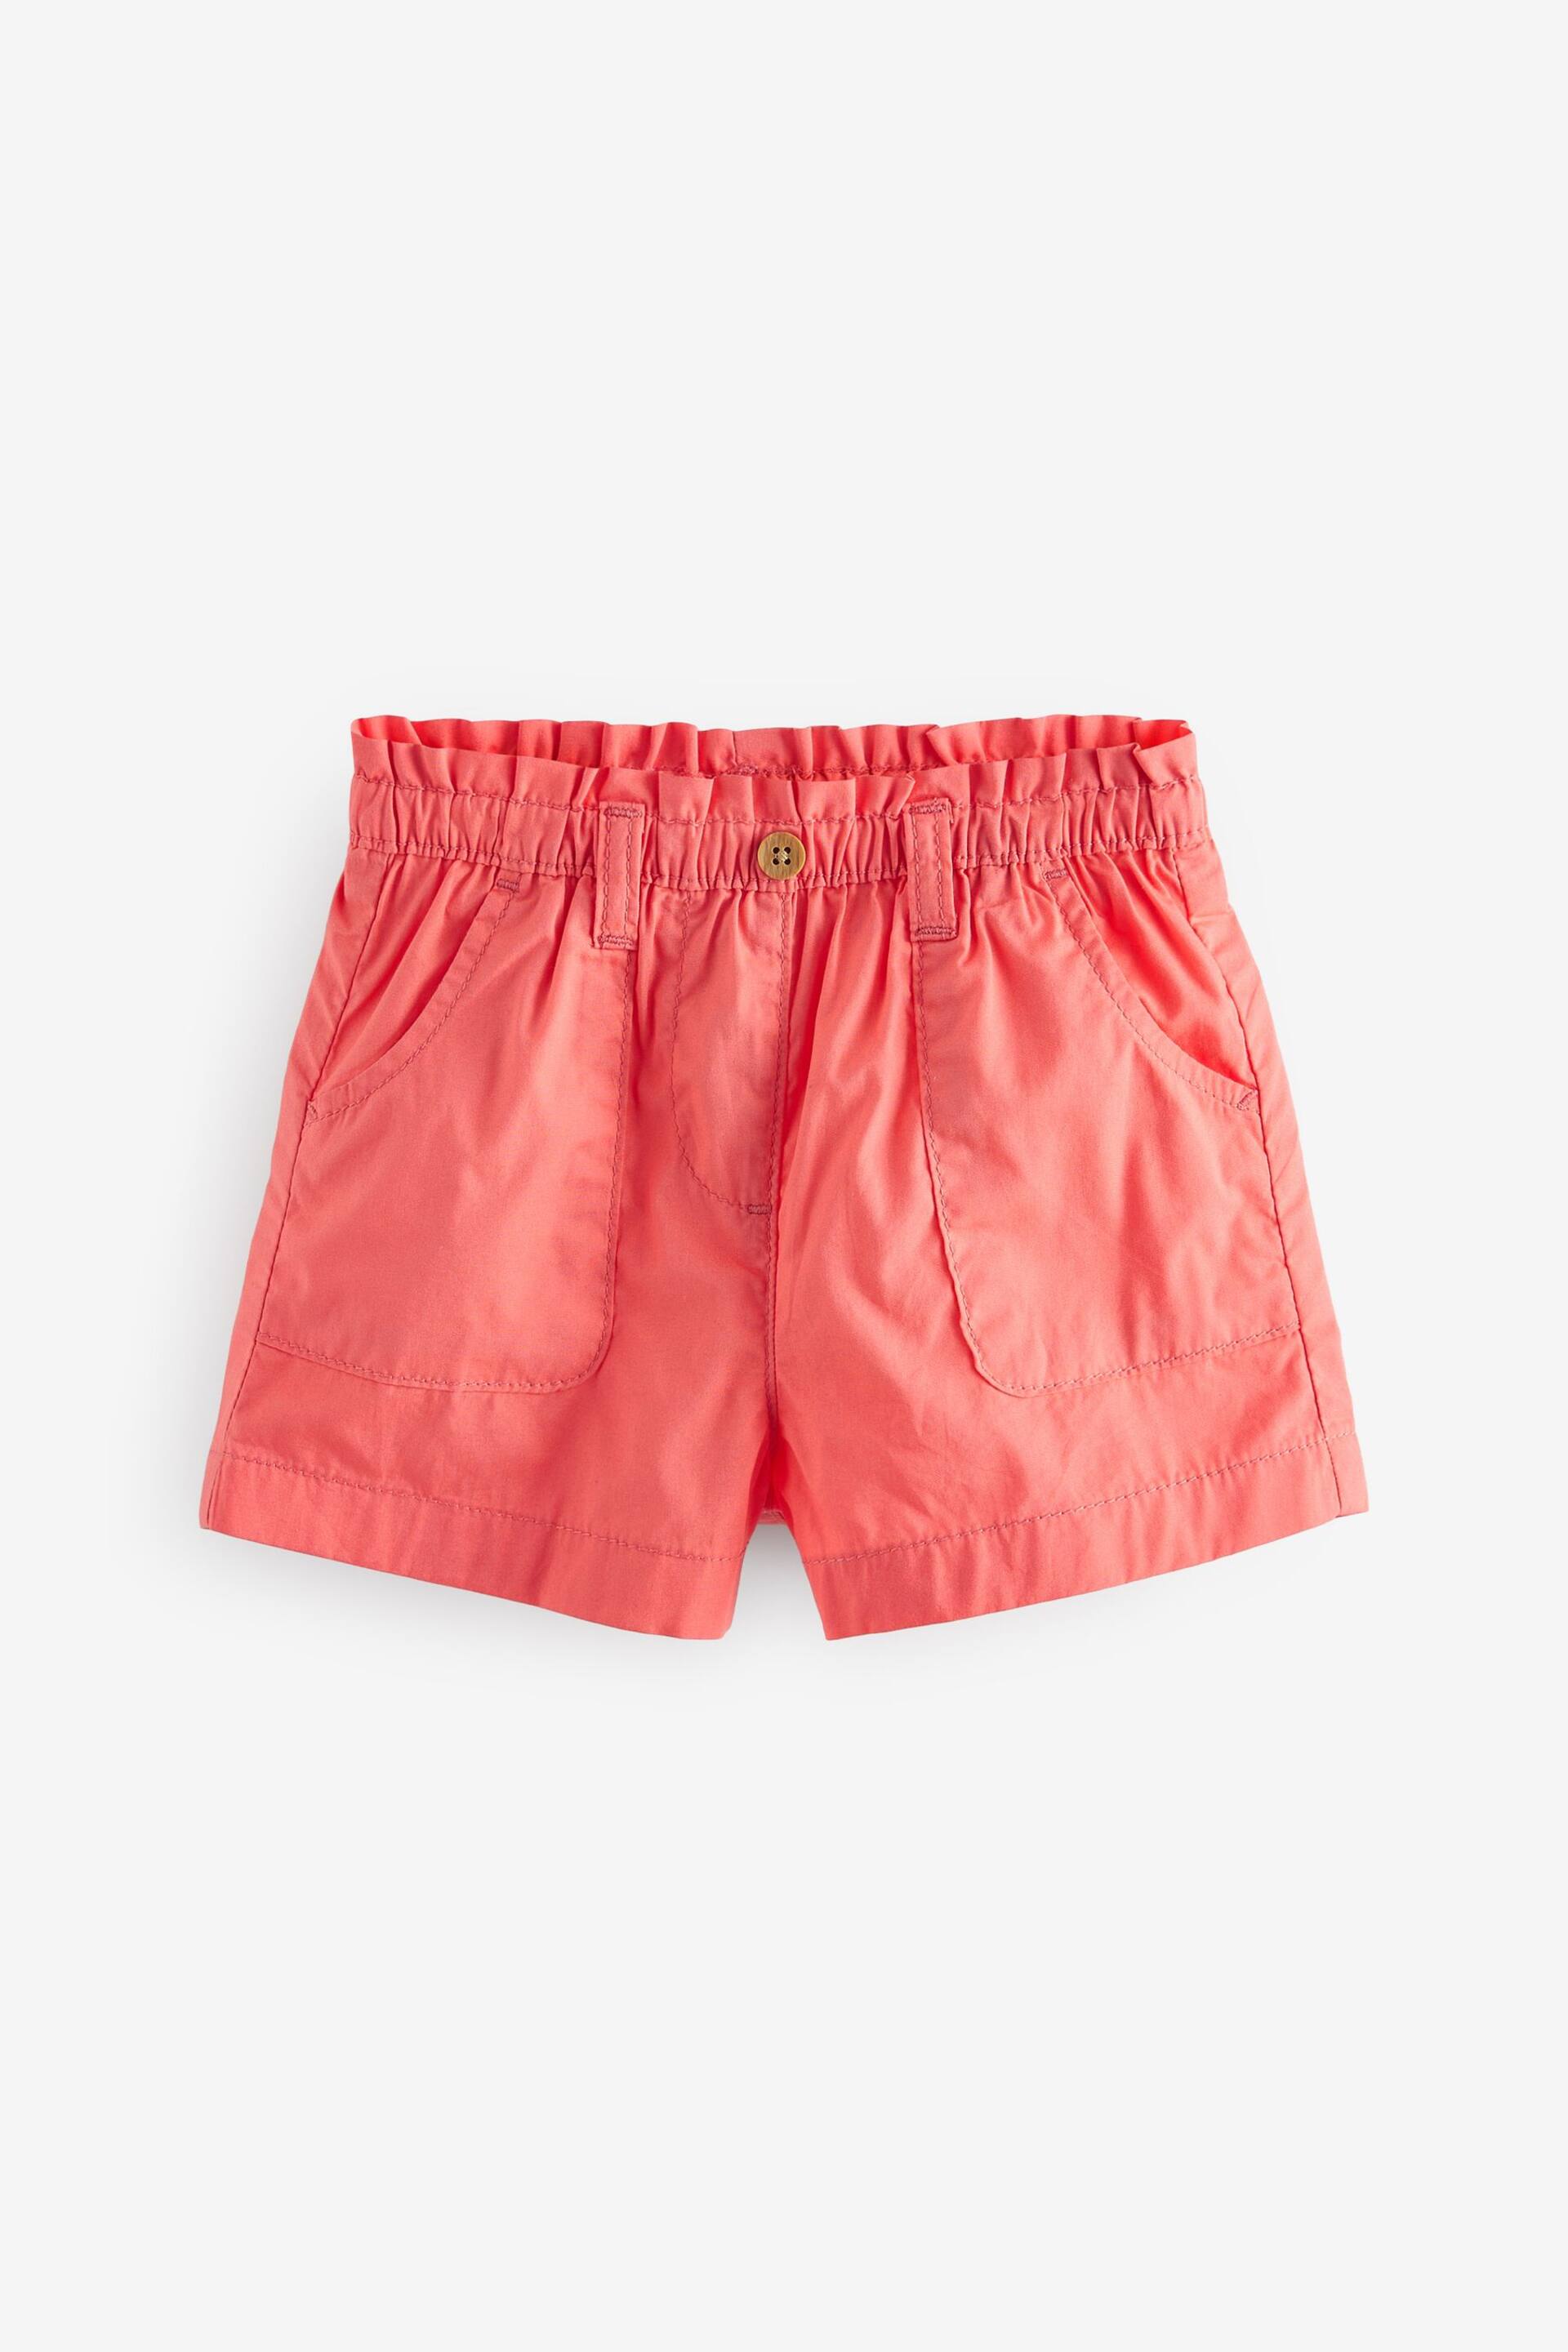 Pink Pull-On Shorts (3mths-7yrs) - Image 5 of 8